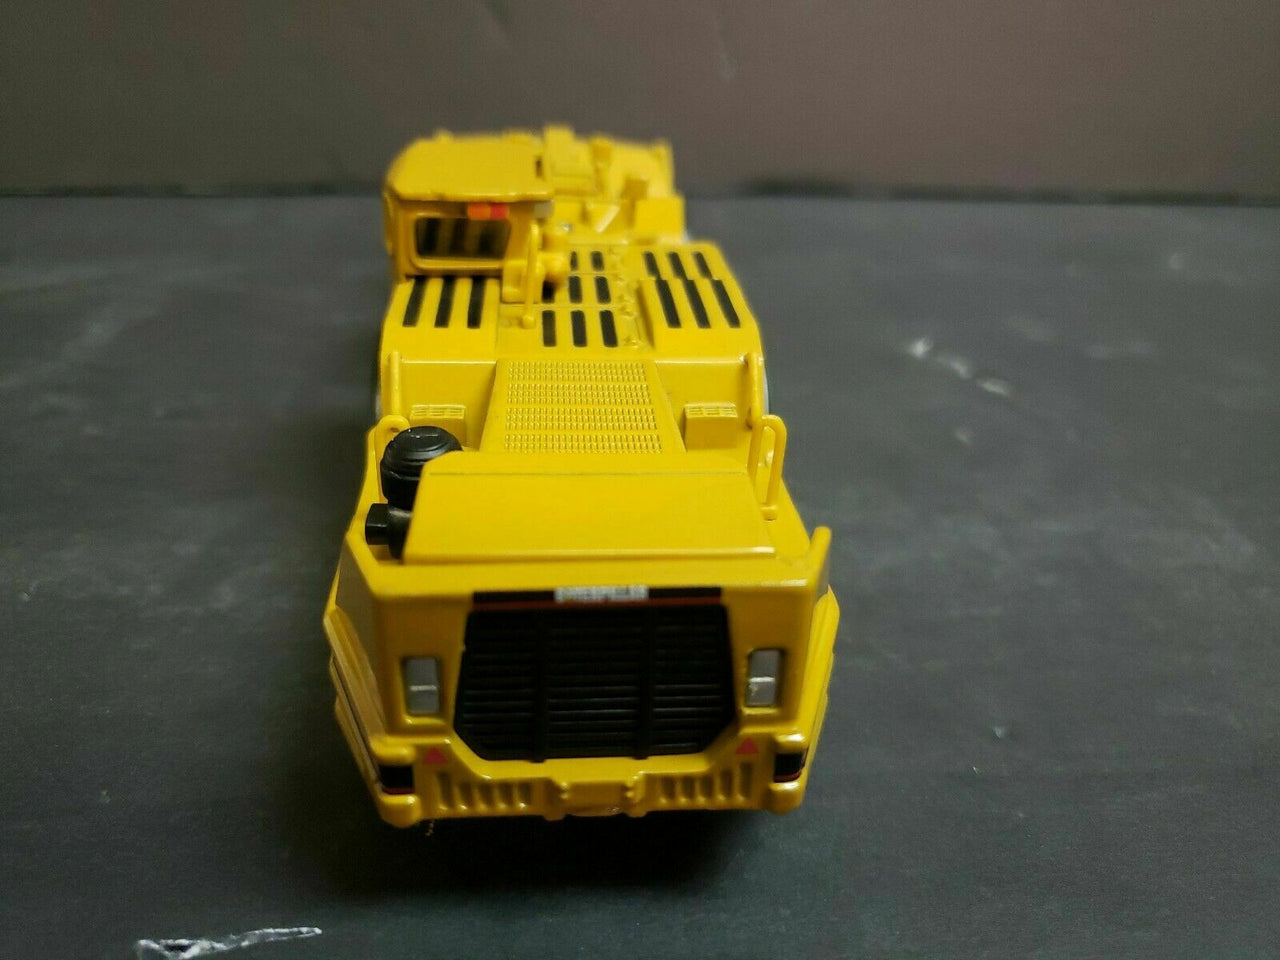 55140 Caterpillar R1700G Low Profile Loader 1:50 Scale (Discontinued Model)